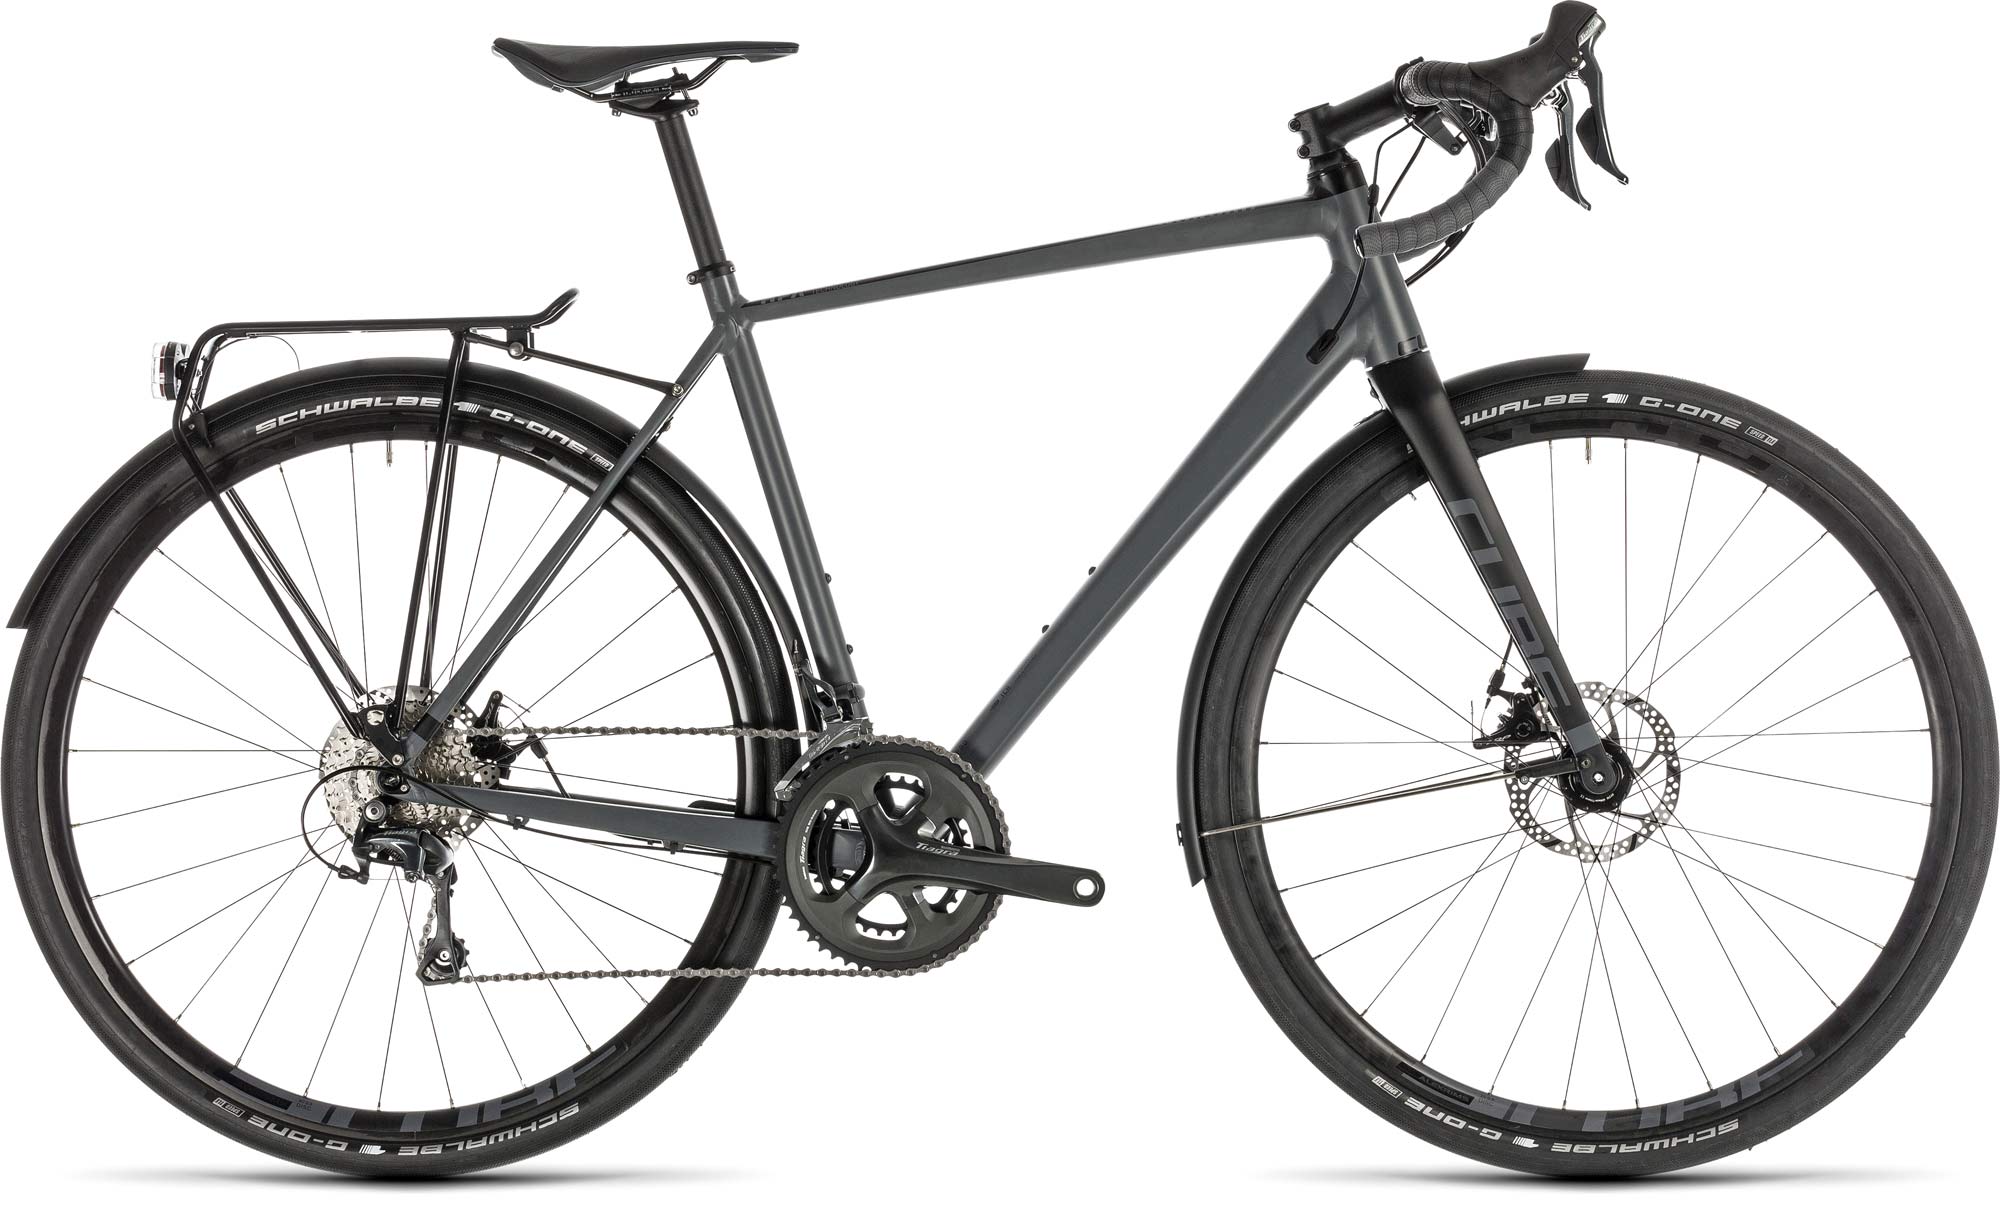 Cubes 2019 Nuroad is an affordable alloy gravel bike for touring & commuting